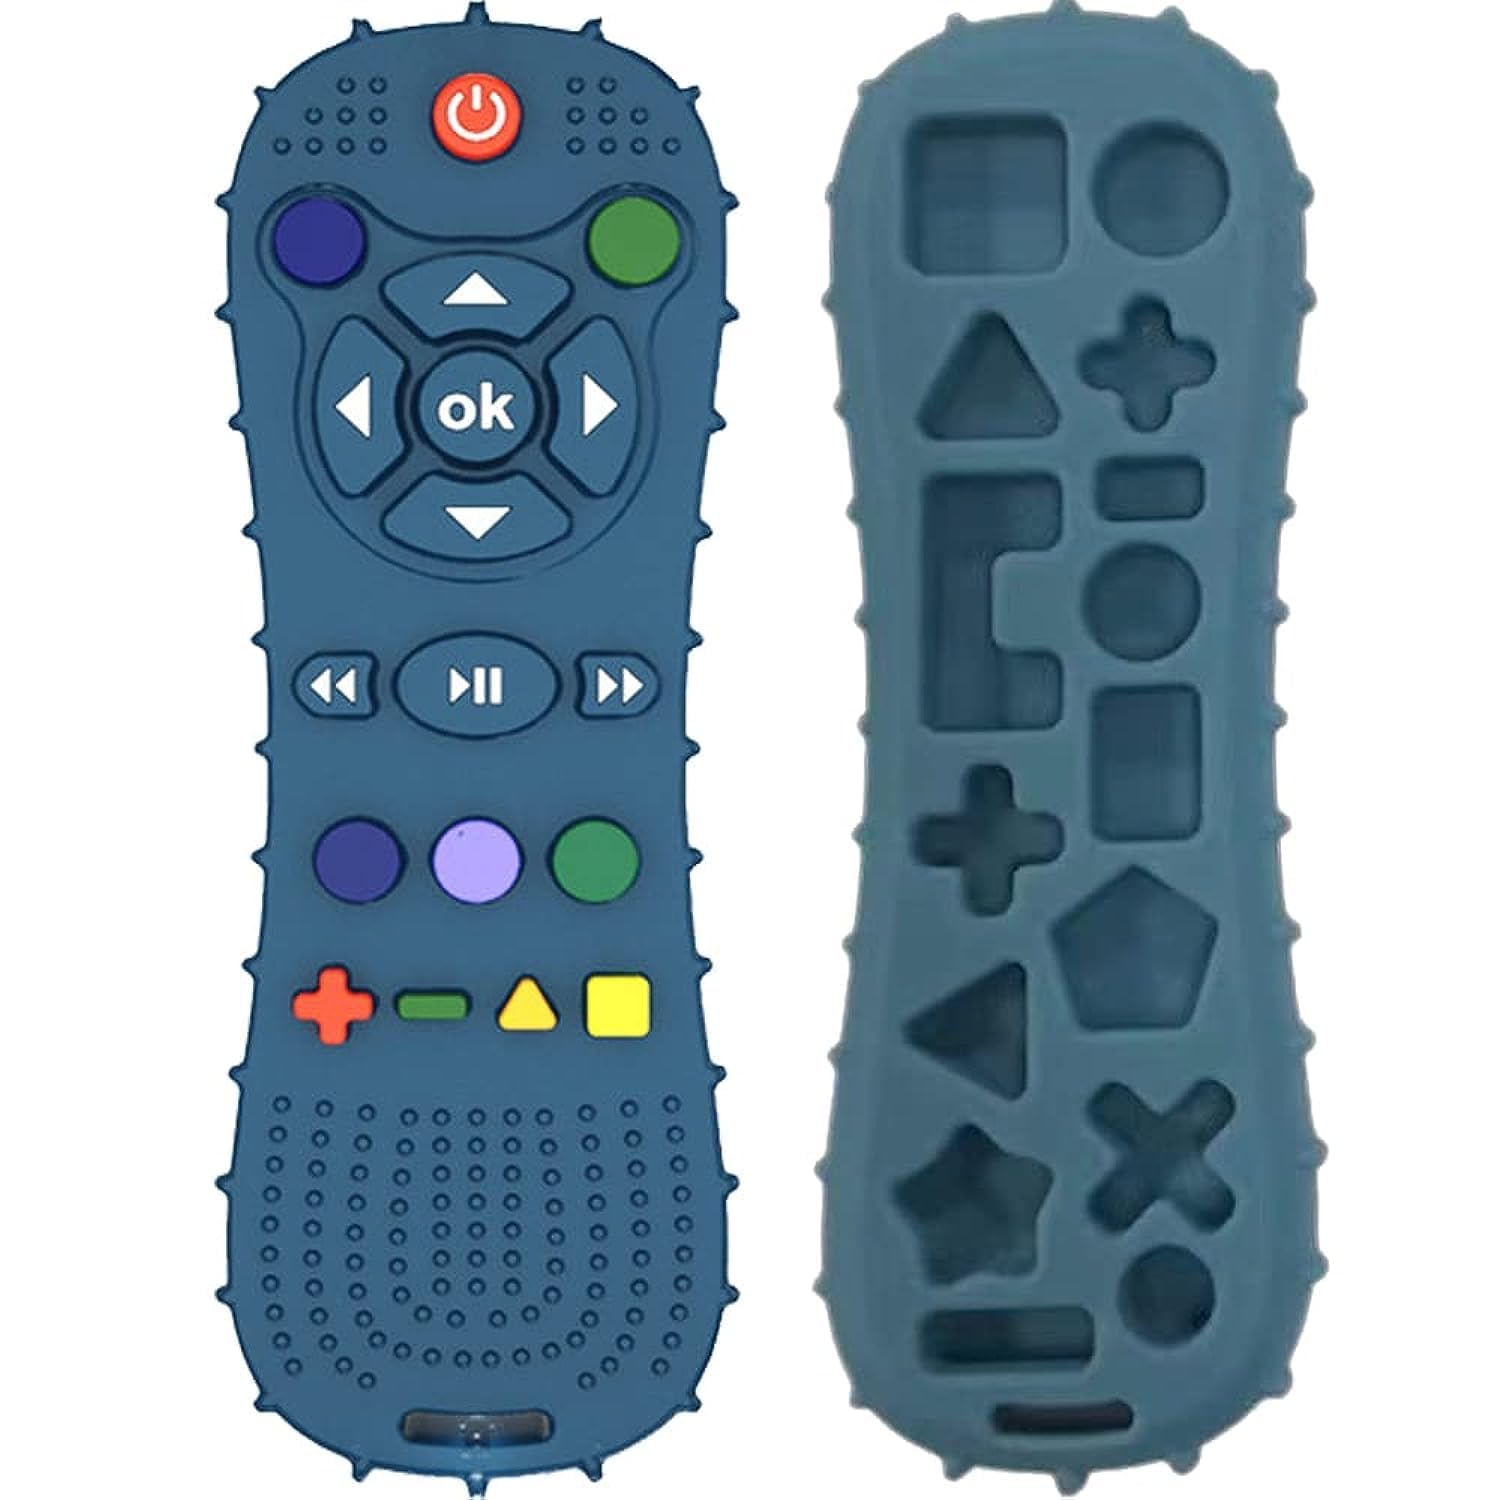 Remote teether for Baby, Soft Chew Toys with TV Remote Control Shape, Early Educational Sensory Toy for Babies Teething Relief and Soothe Sore Gum Infant Teether for 3-12 Months Blue